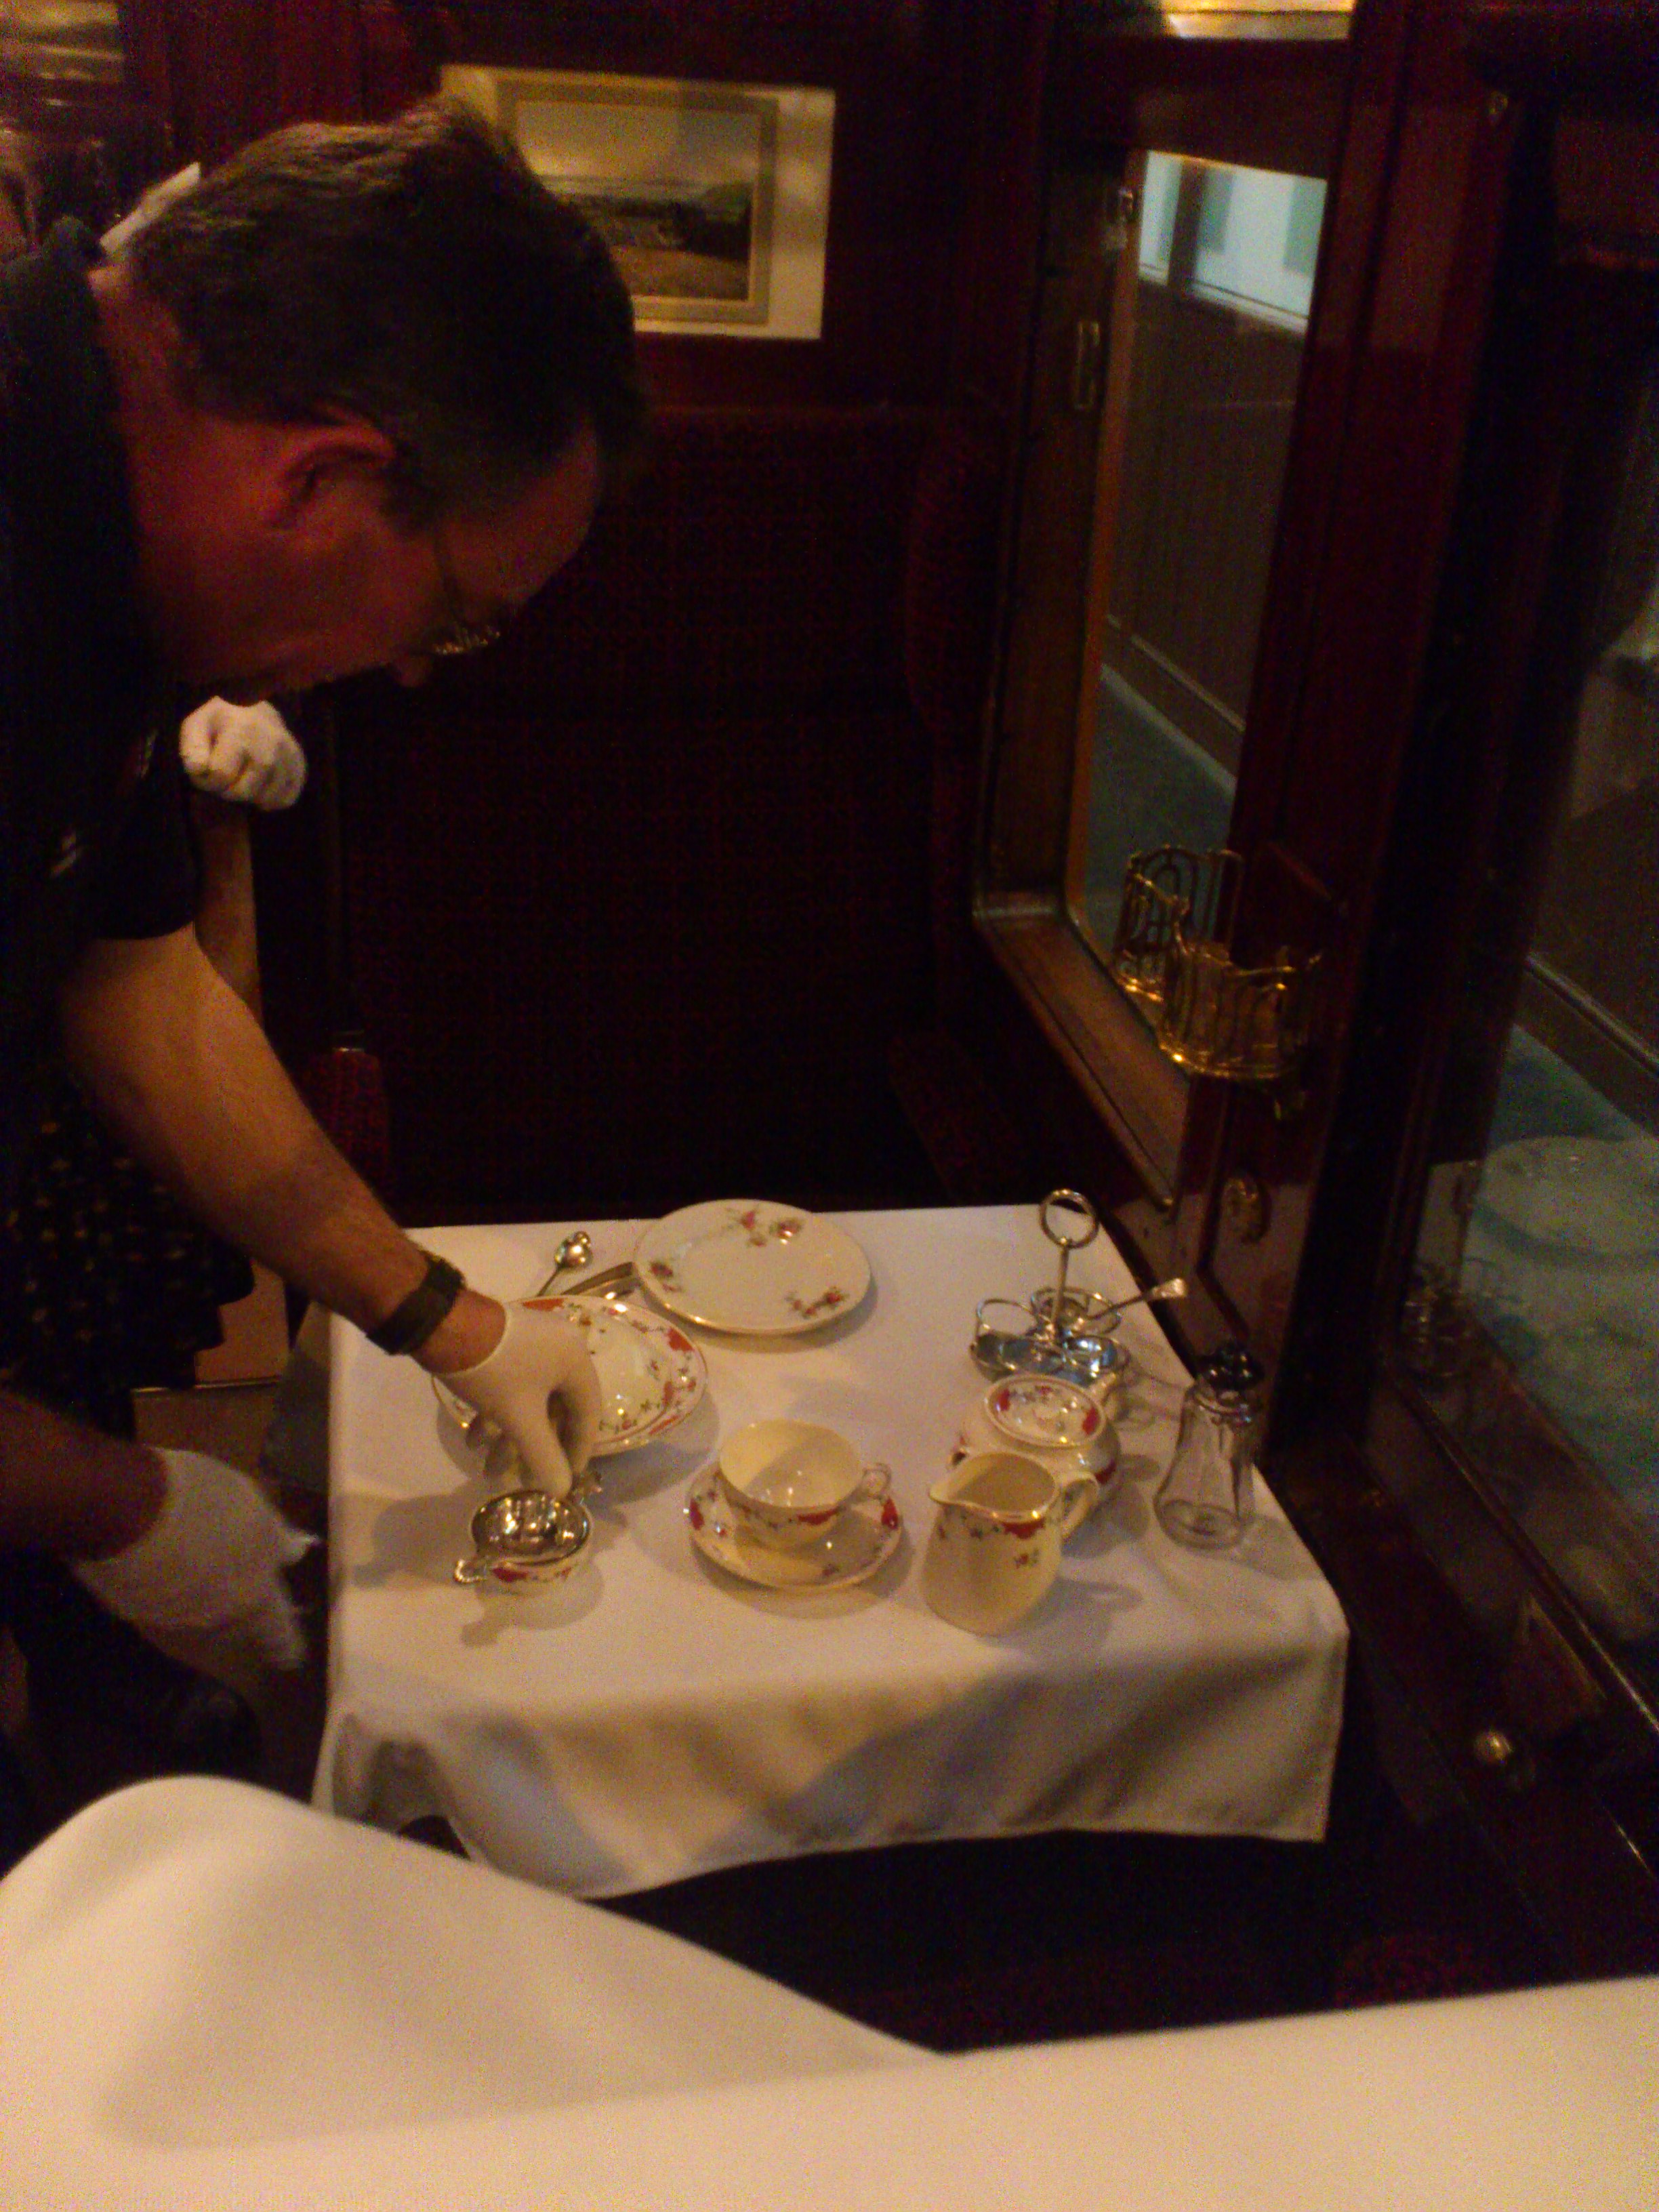 On Thursday we started to add some collection items to the displays. Here, Chris is setting one of the tables in our Midland Railway dining carriage.